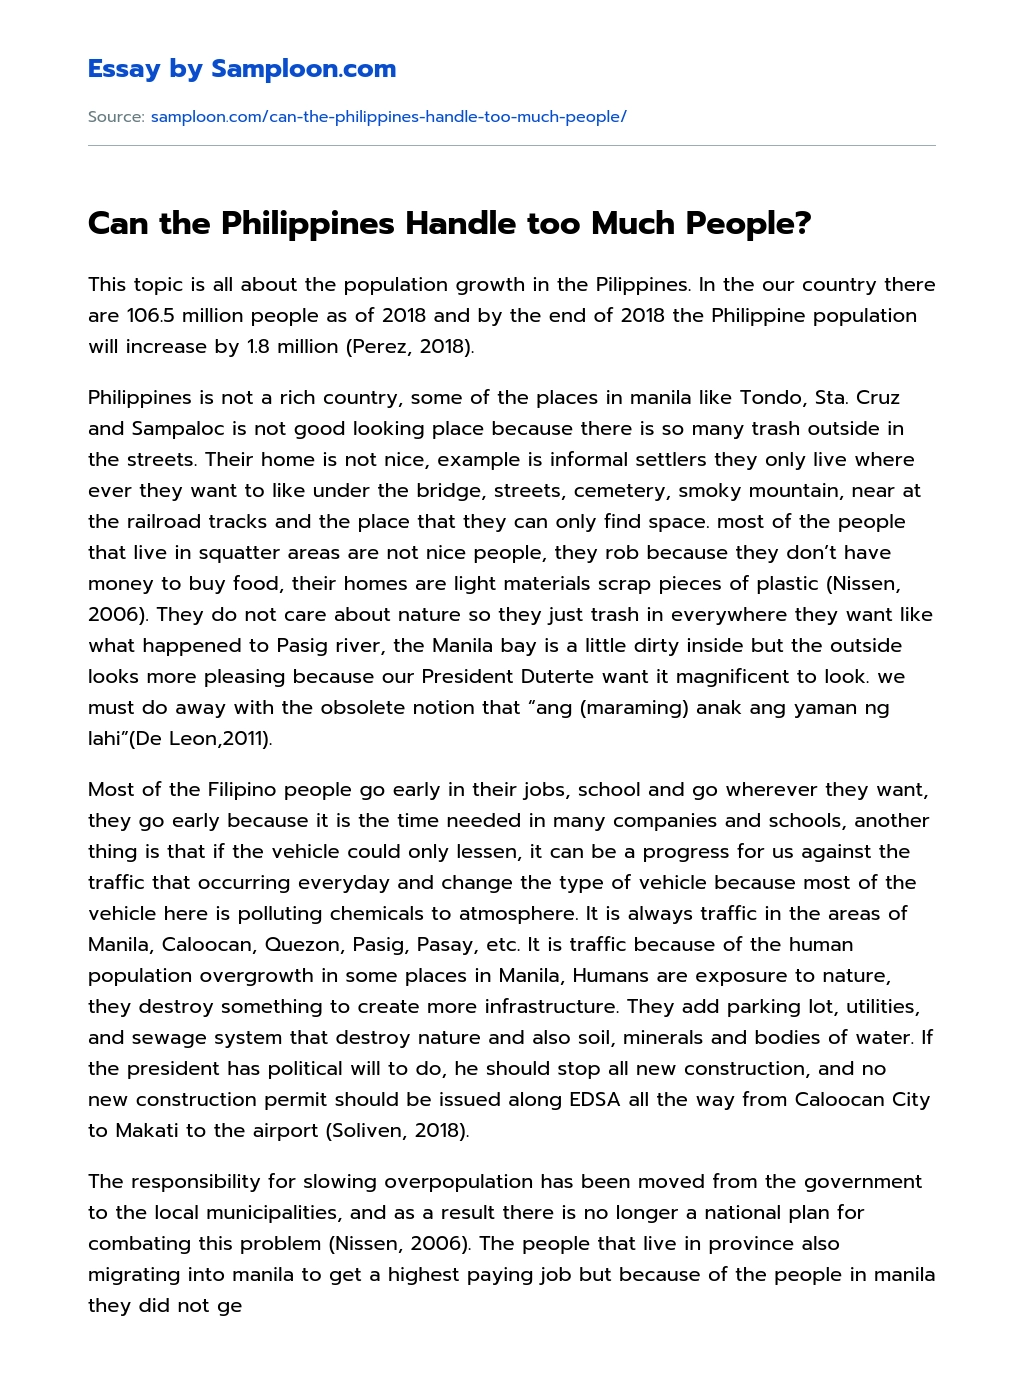 Can the Philippines Handle too Much People? essay